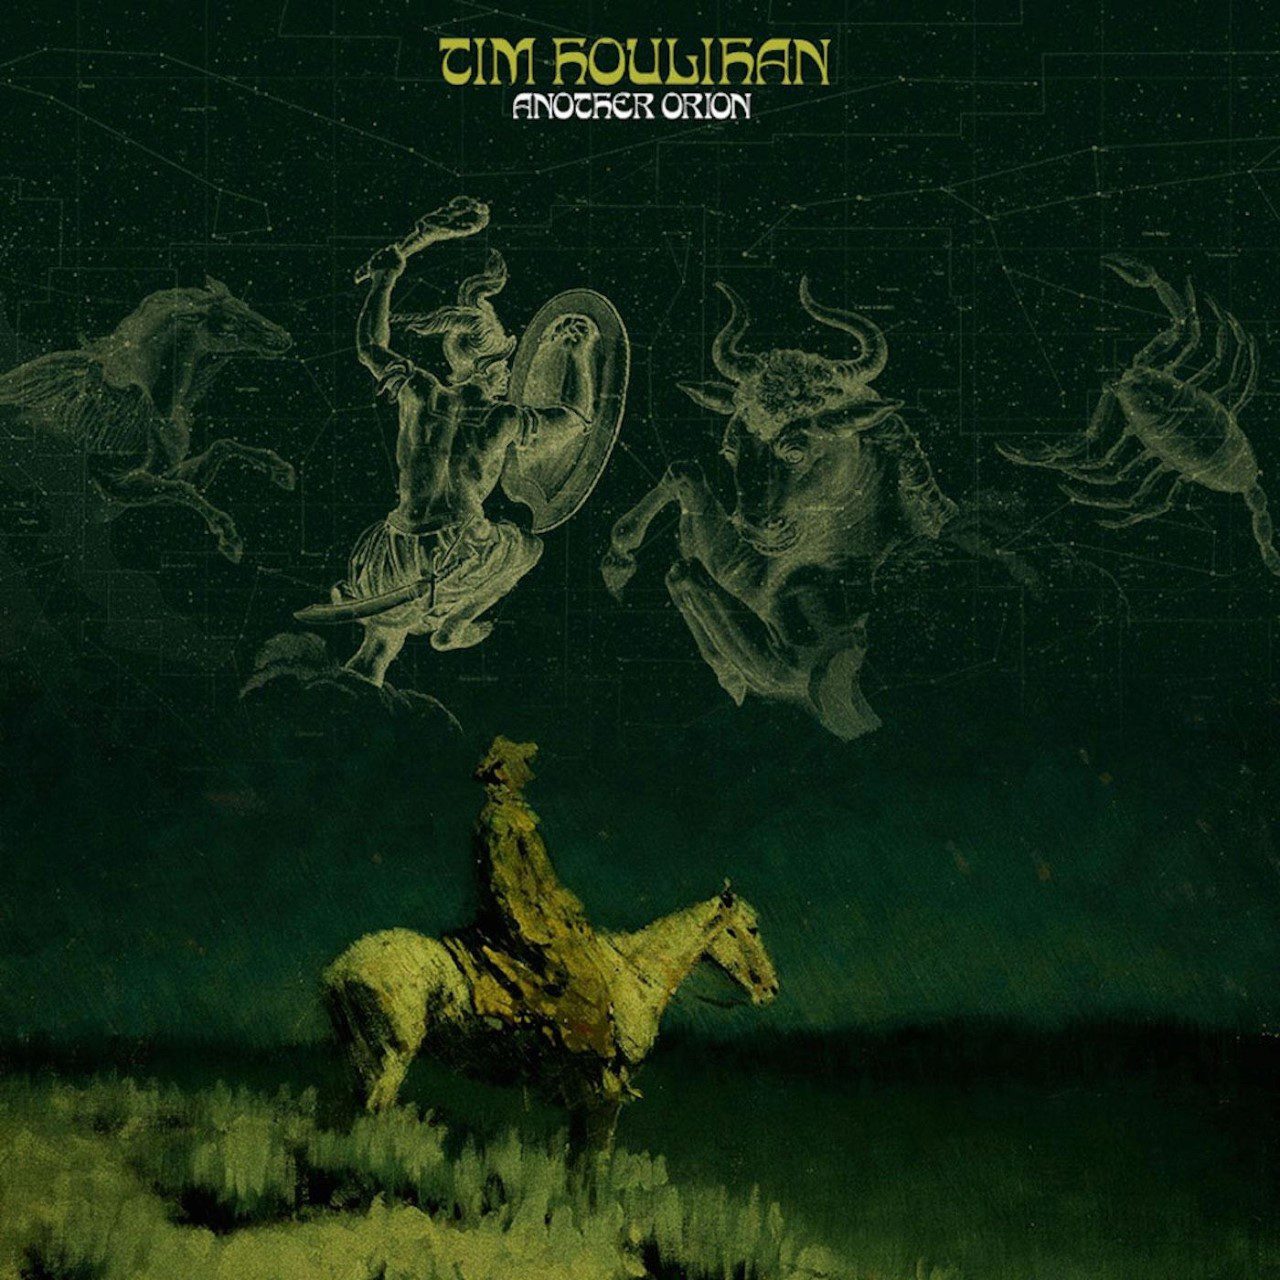 Tim Houlihan - Another Orion cover album